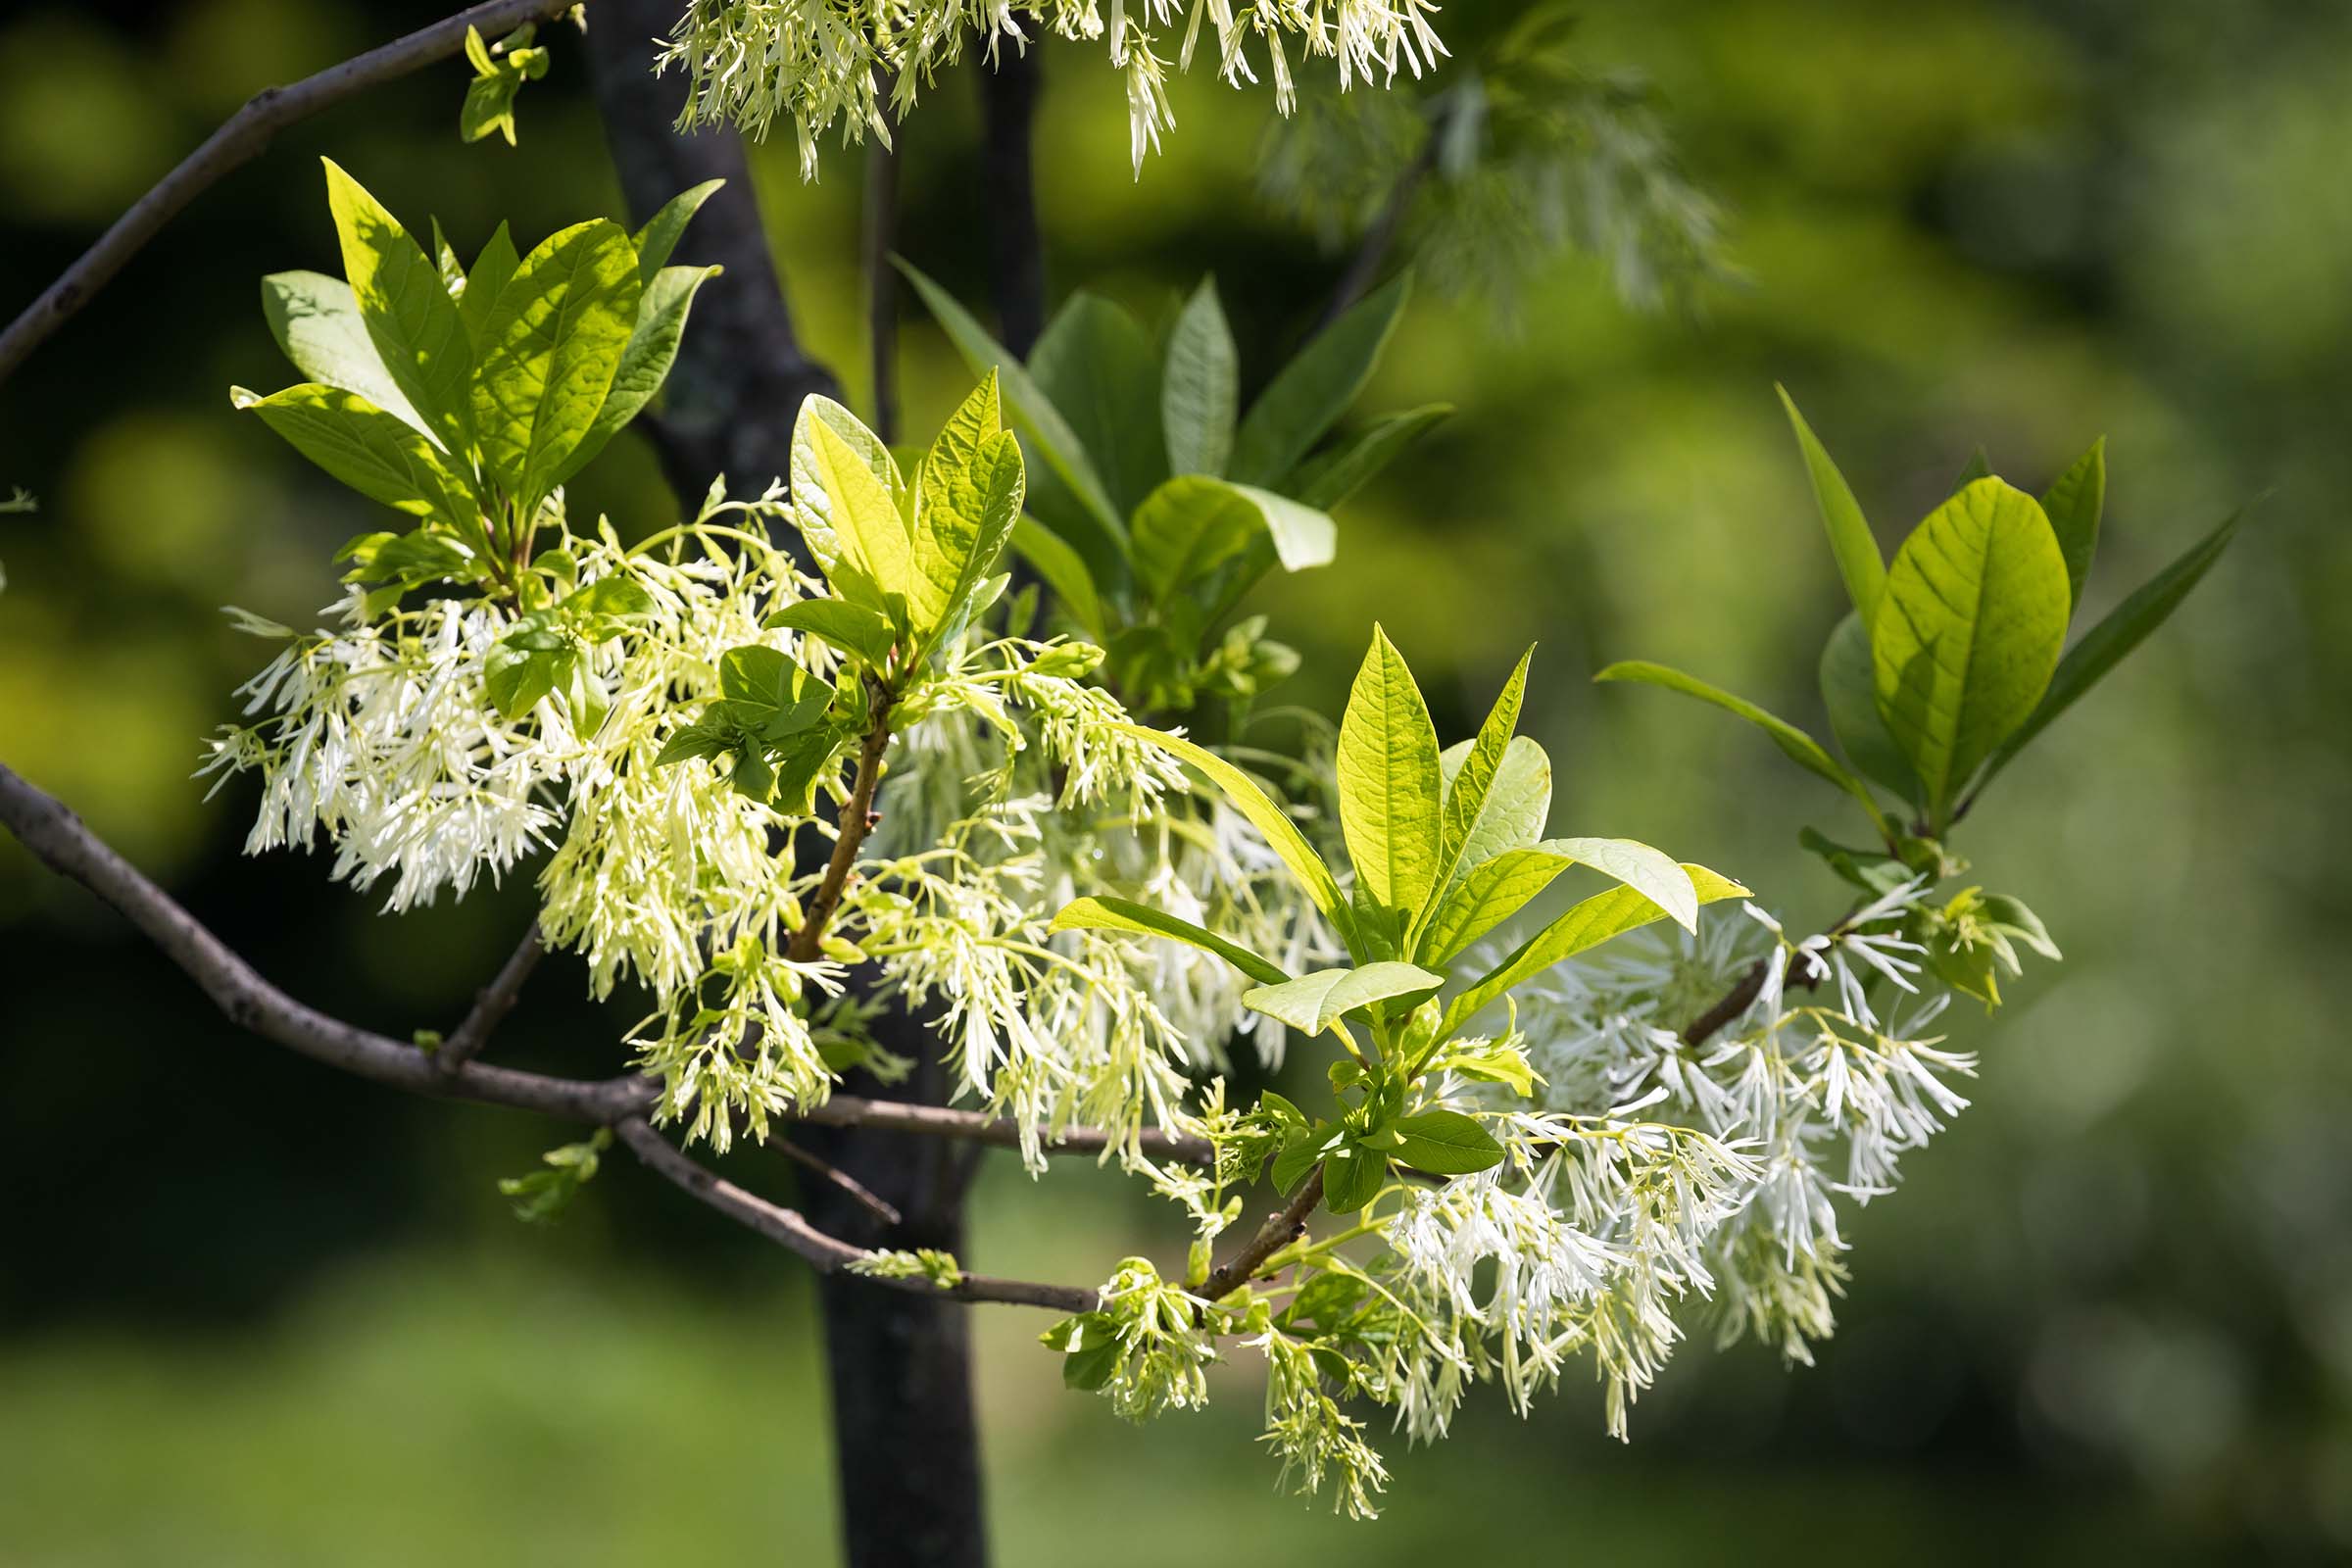 A fringe tree branch with green leaves and the white blossoms